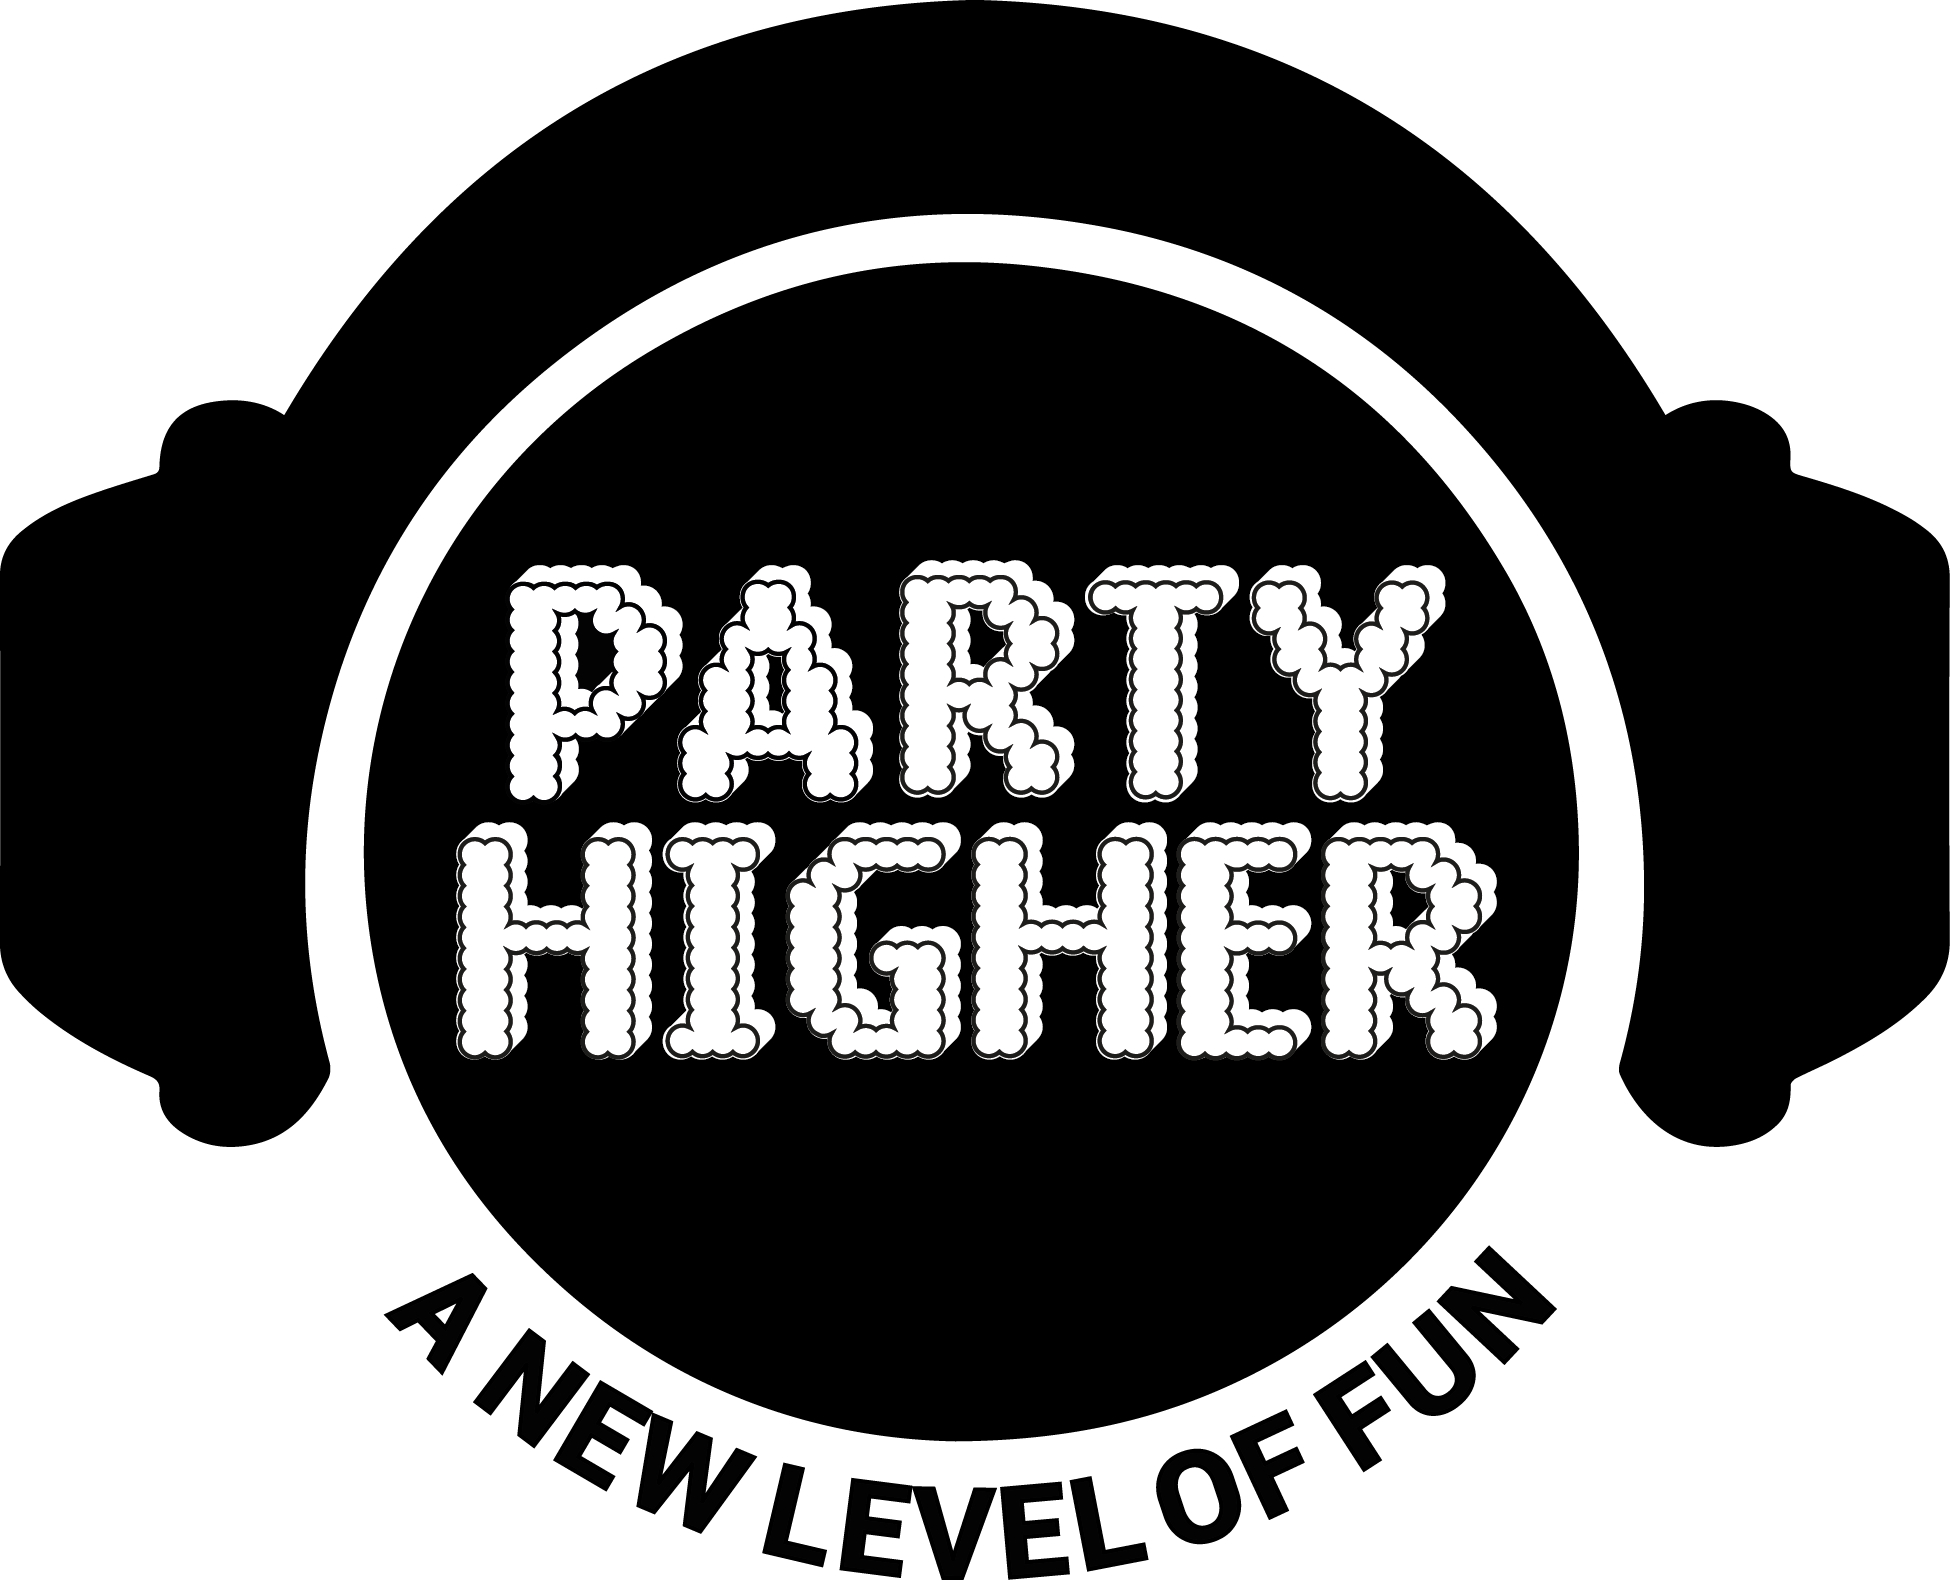 Party Higher